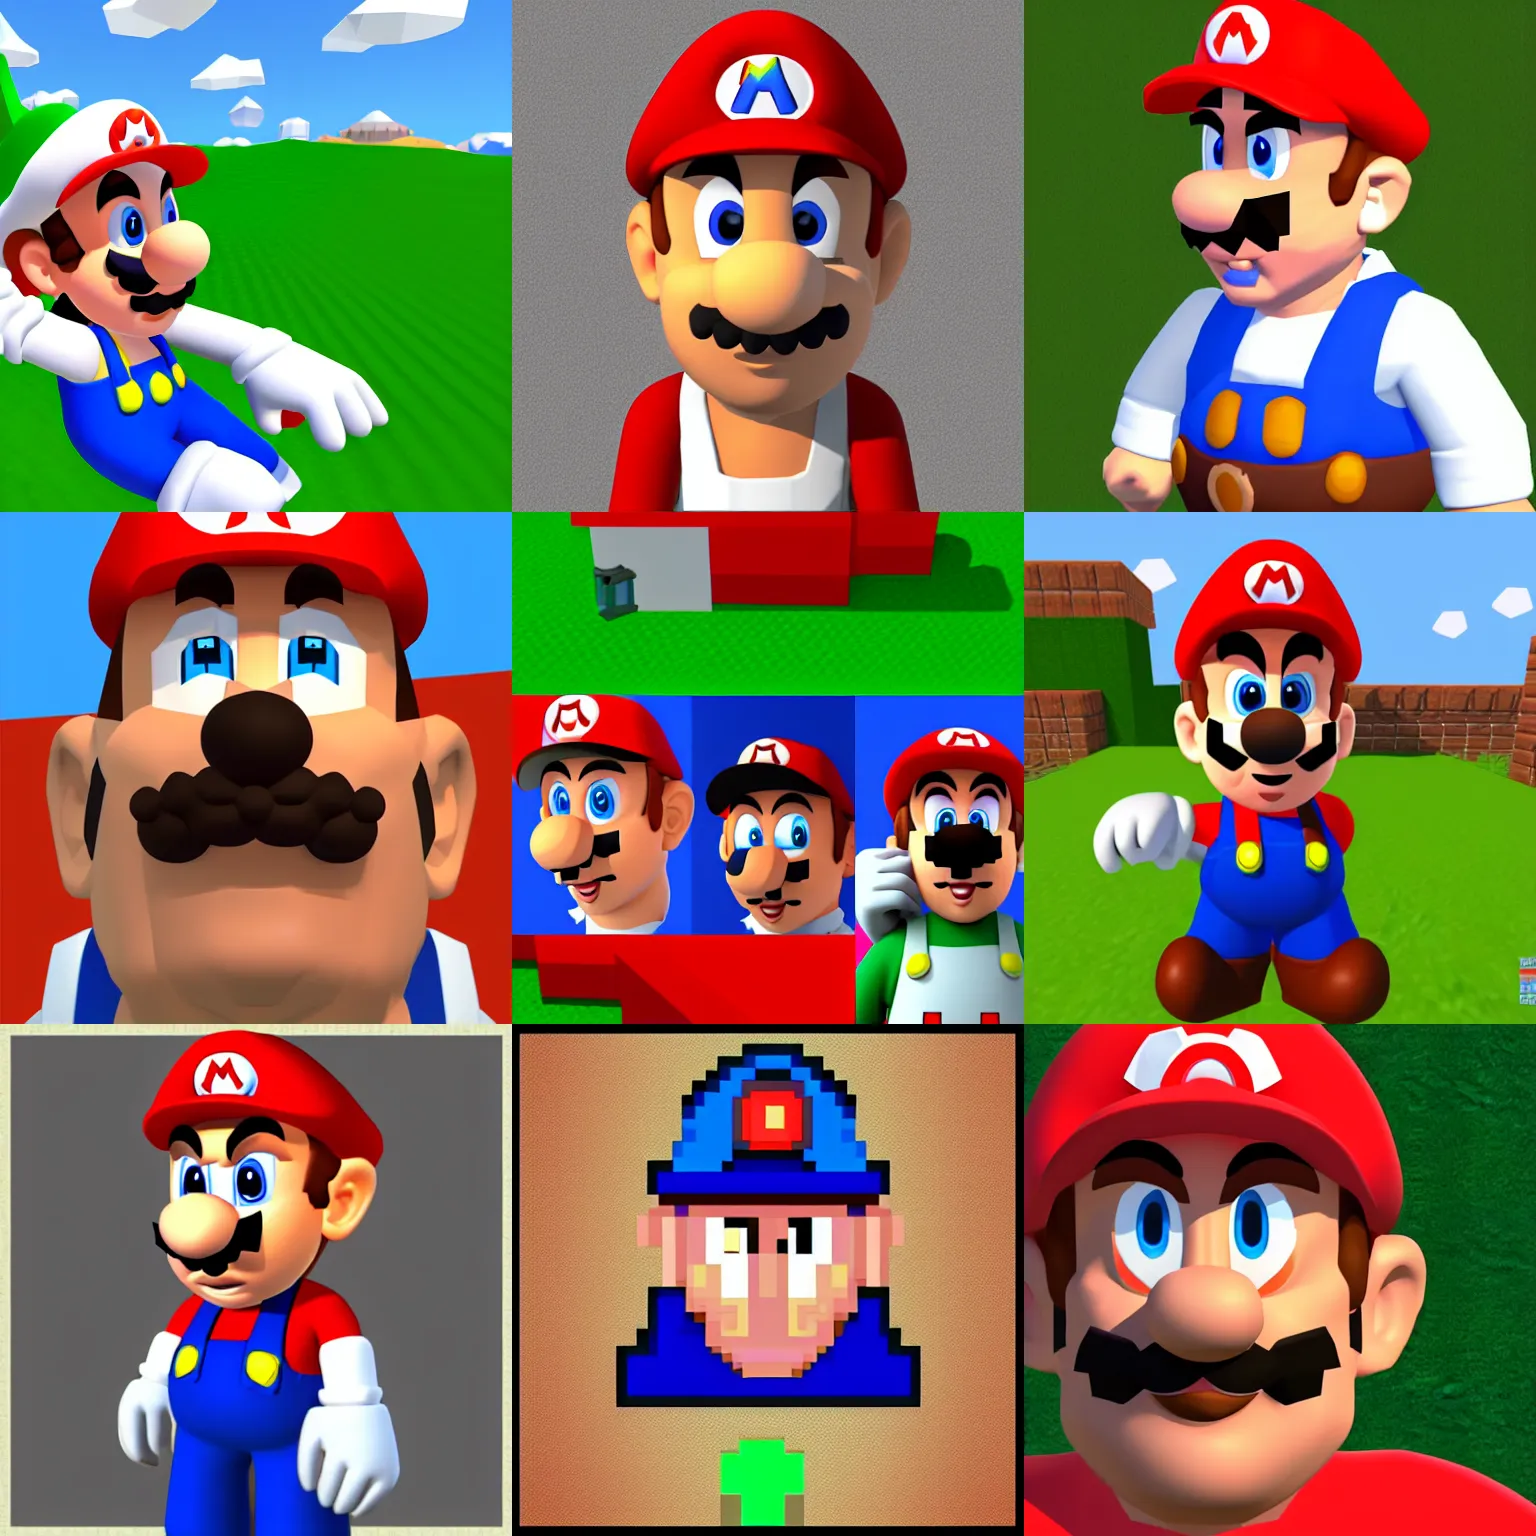 Super Mario 64 and 'mod' culture: meet the man behind the high-def makeover, Game culture